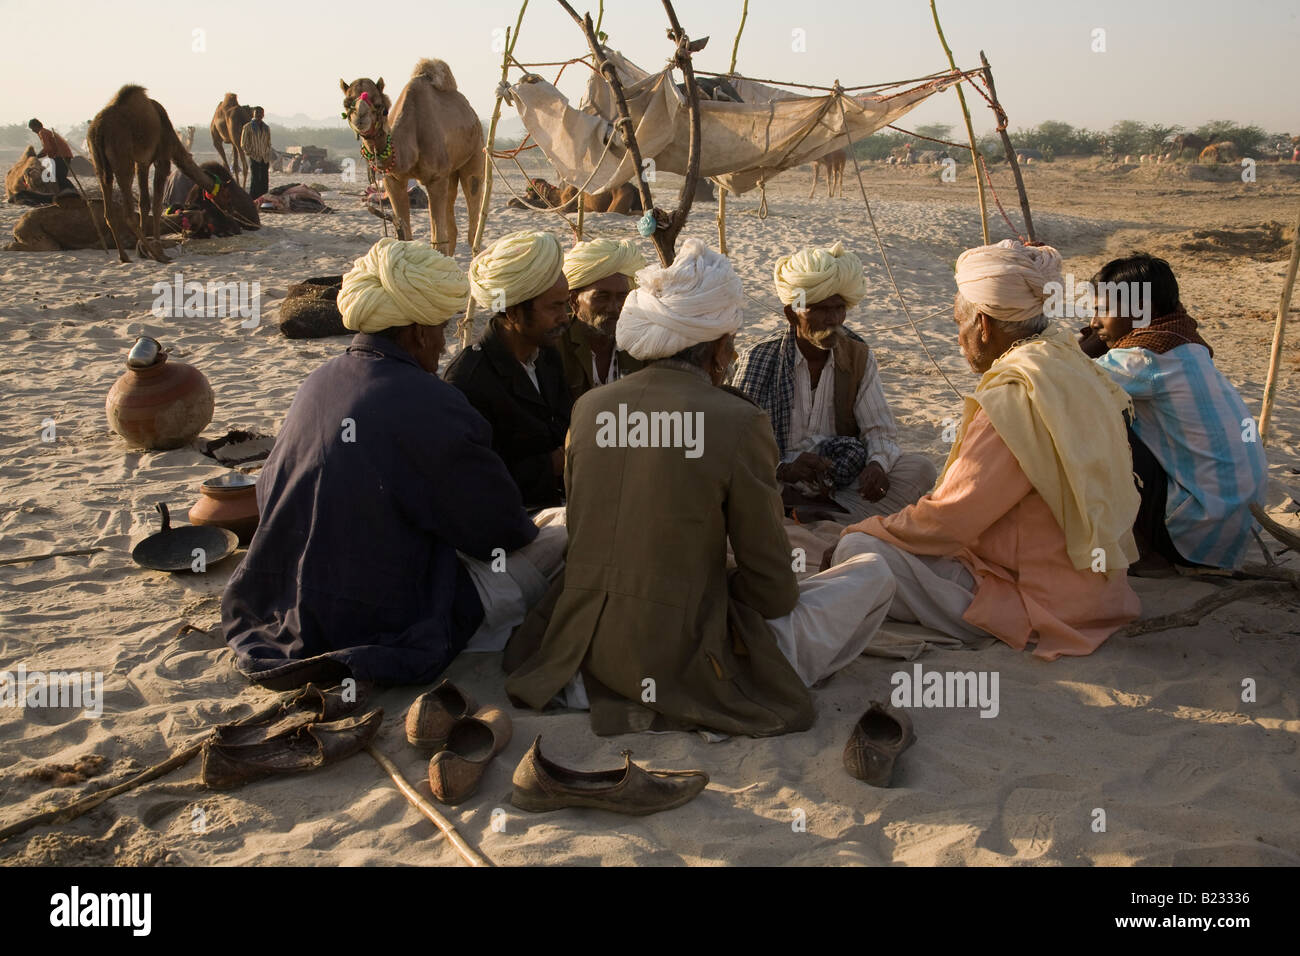 A group of men are seated in a circle in the early morning at the Tilwara livestock fair near Balotra, Rajasthan, India Stock Photo